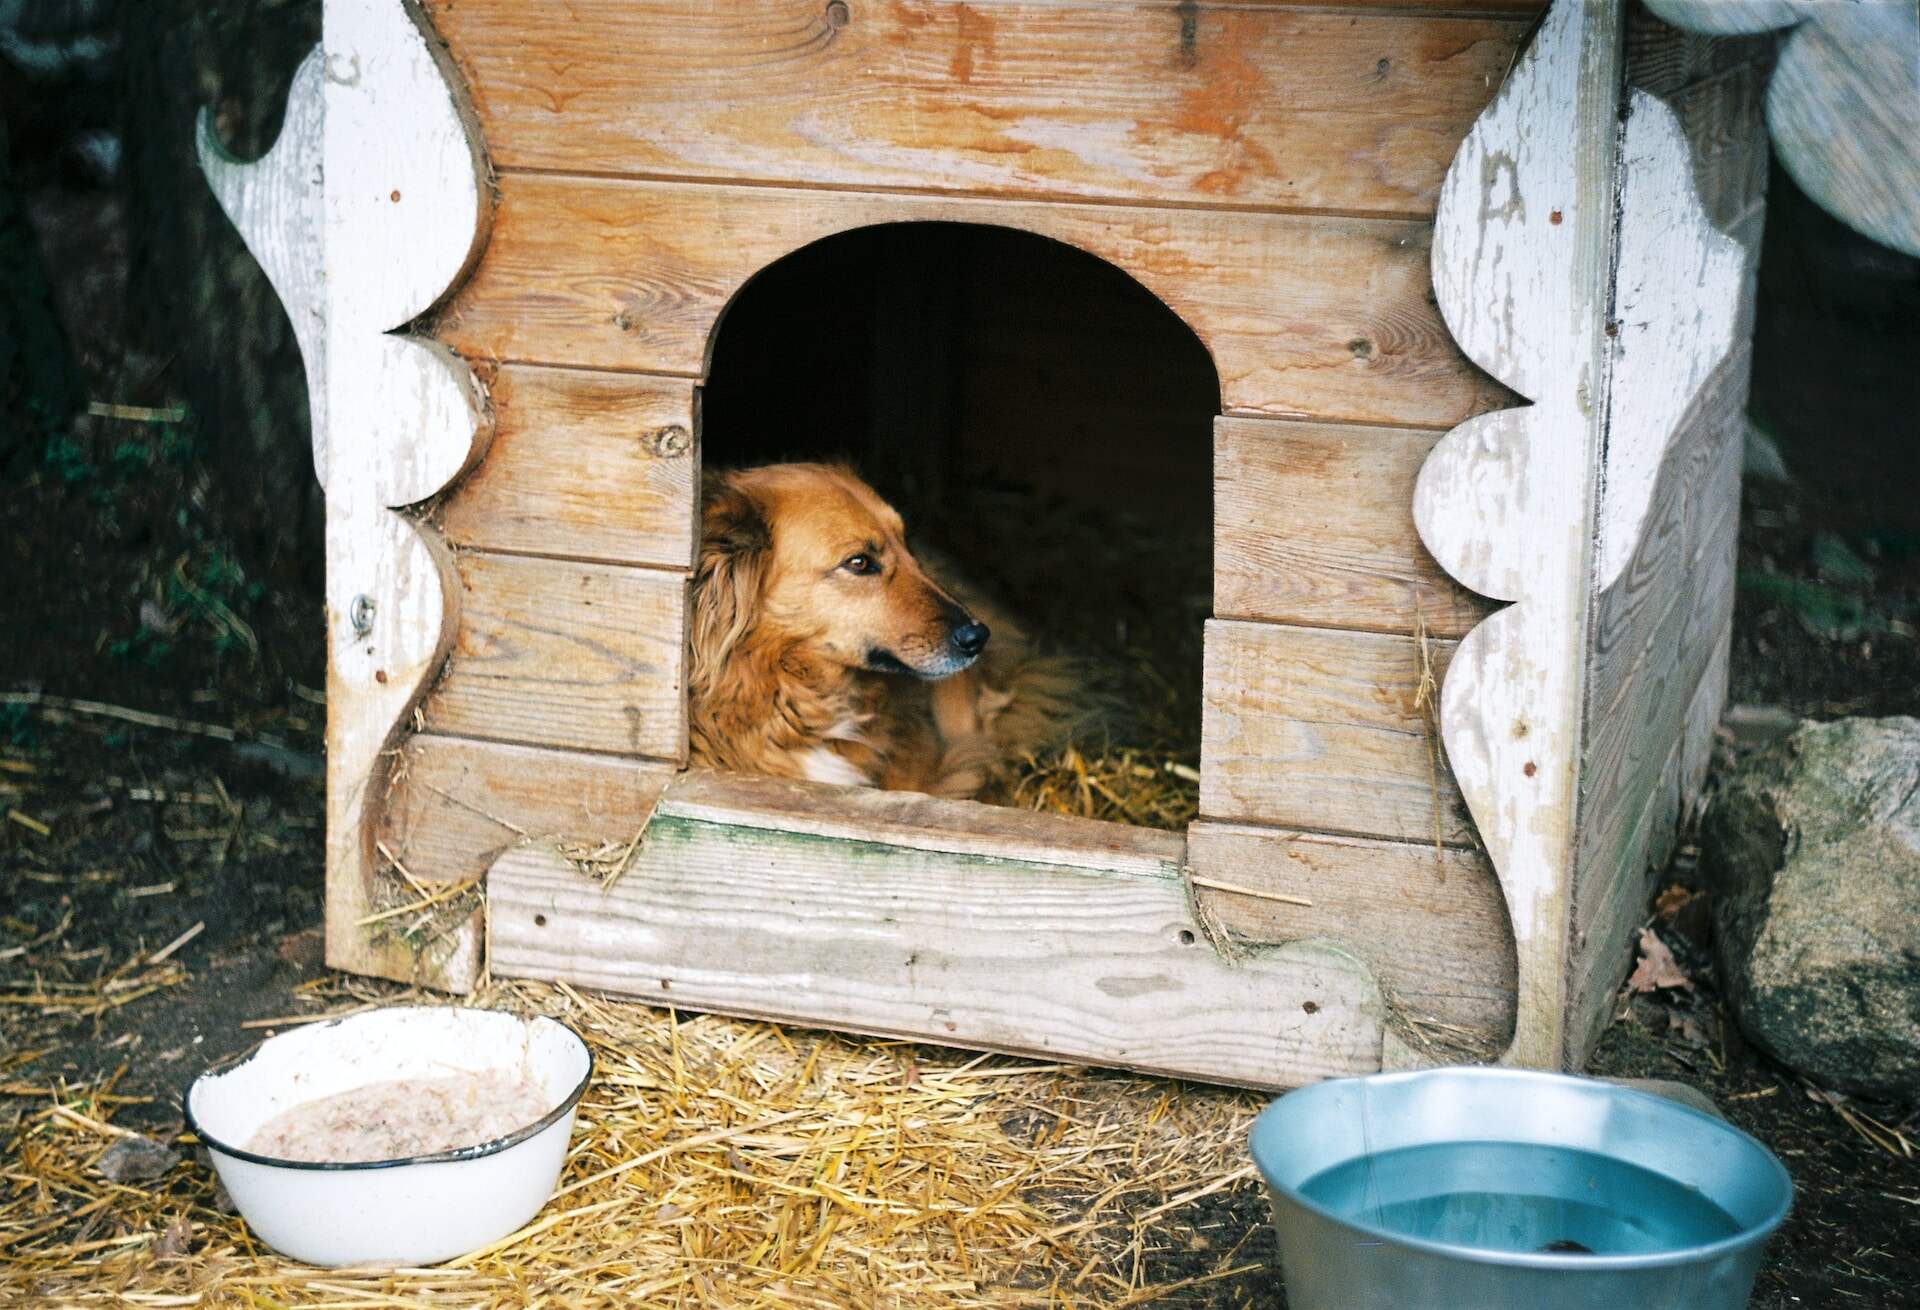 A dog rests inside an outdoor wooden shelter filled with straw